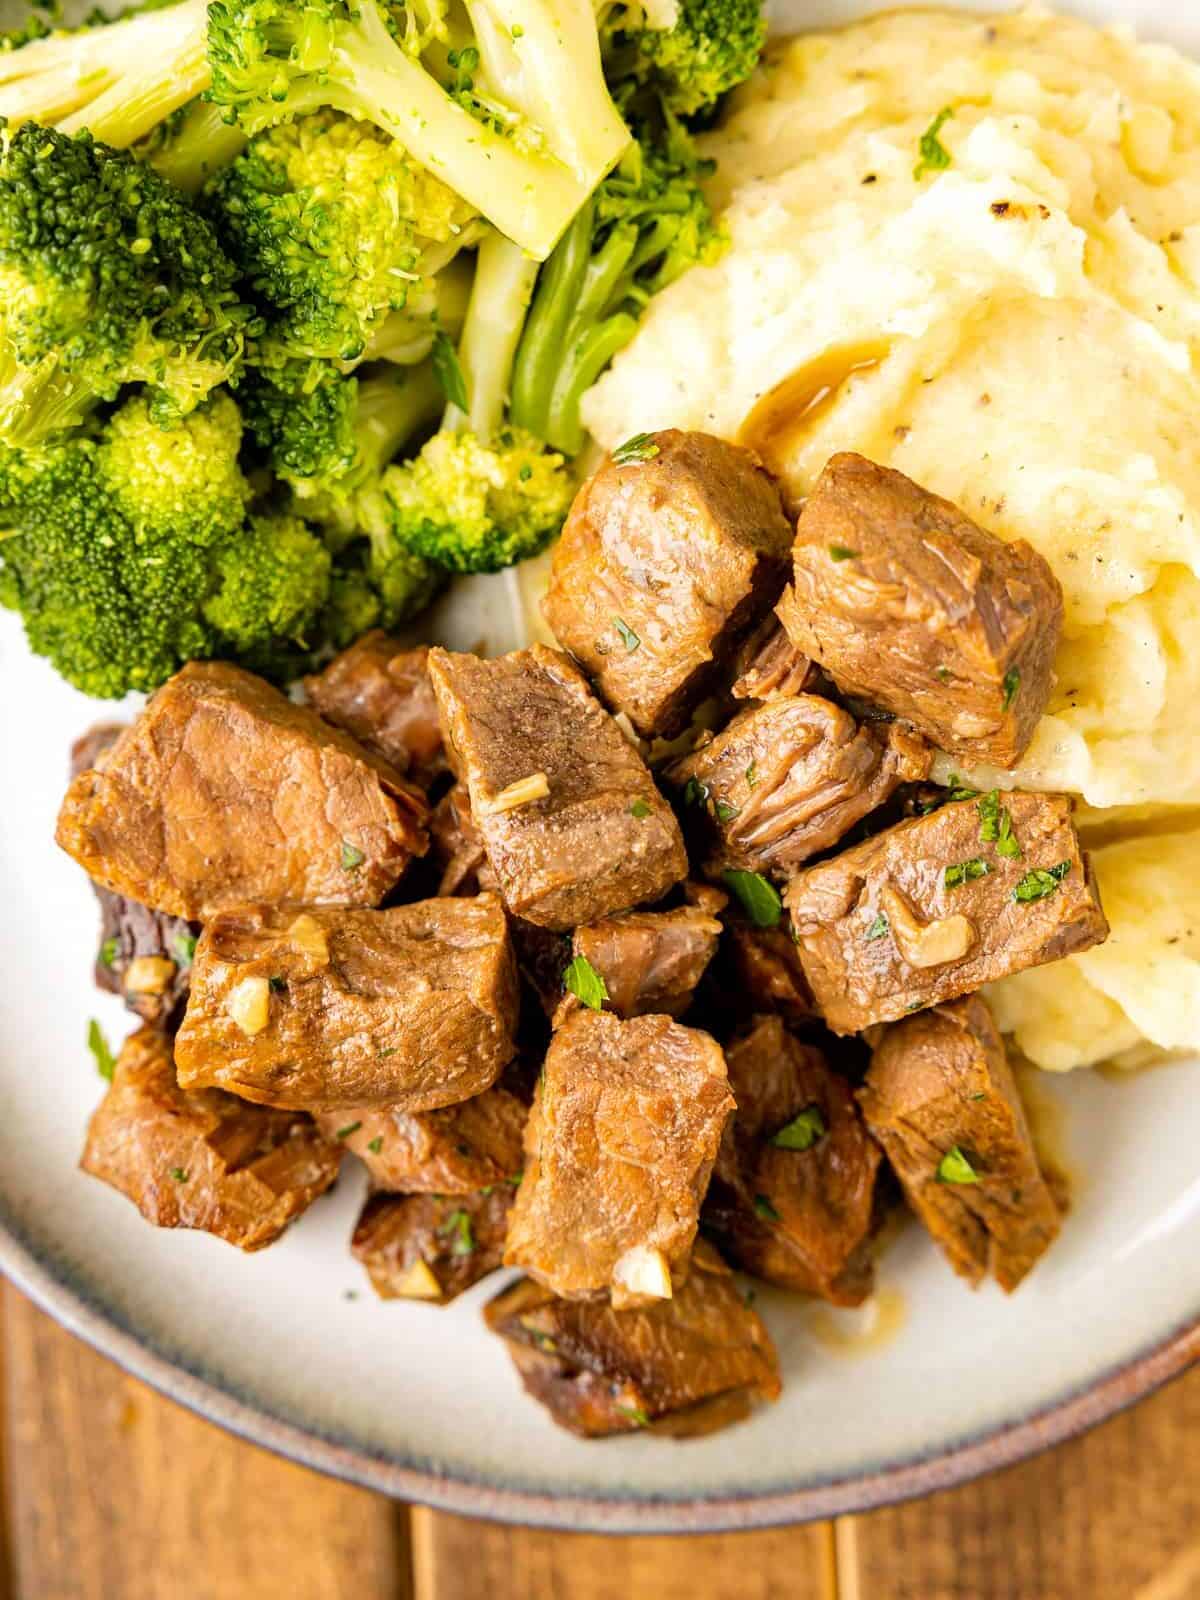 crockpot steak bites on a white plate with mashed potatoes and broccoli.